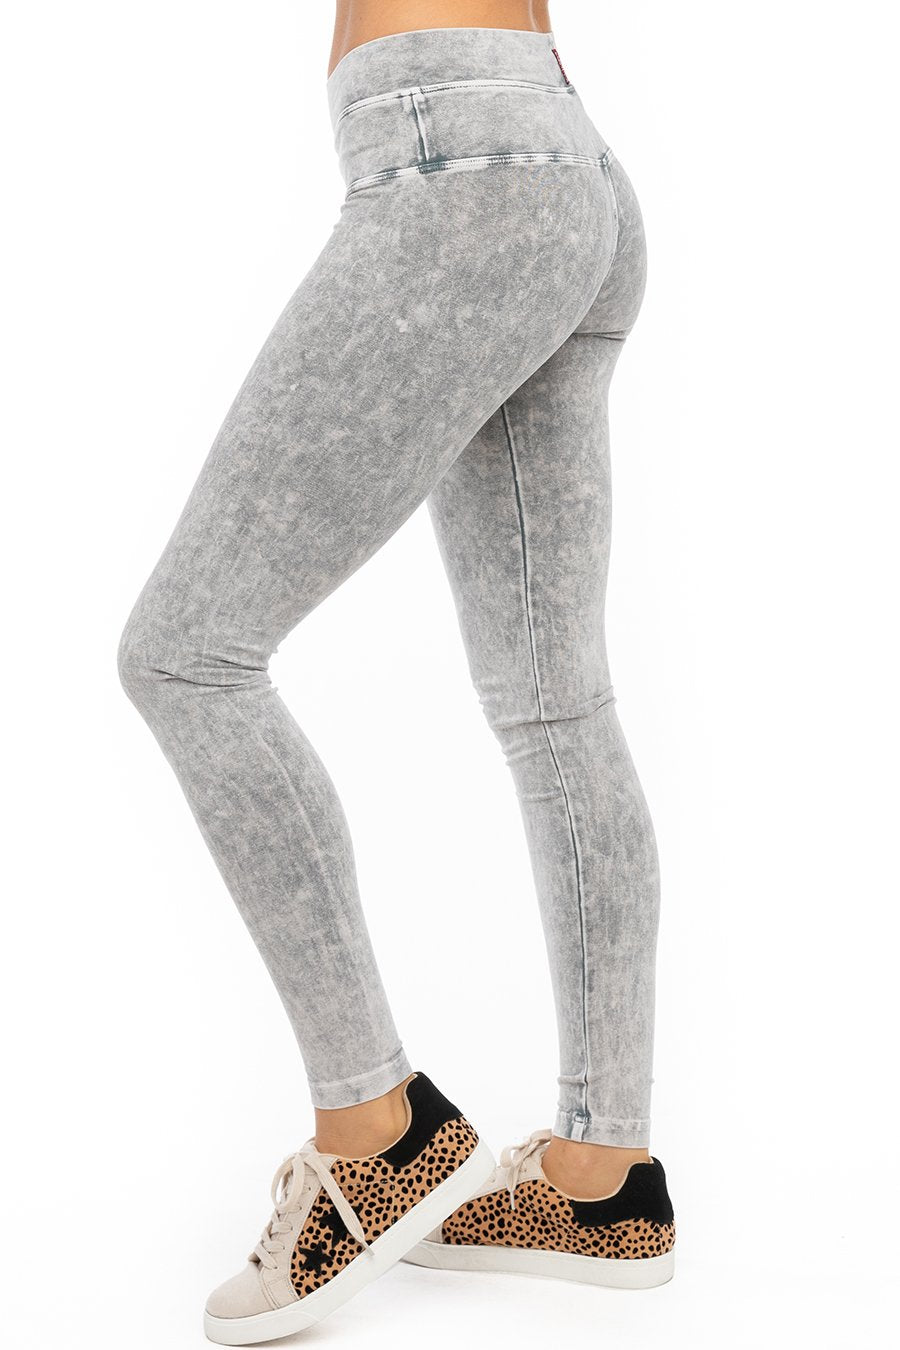 Hard Tail Forever High Rise Ankle Legging - Mineral Wash 11 - XS